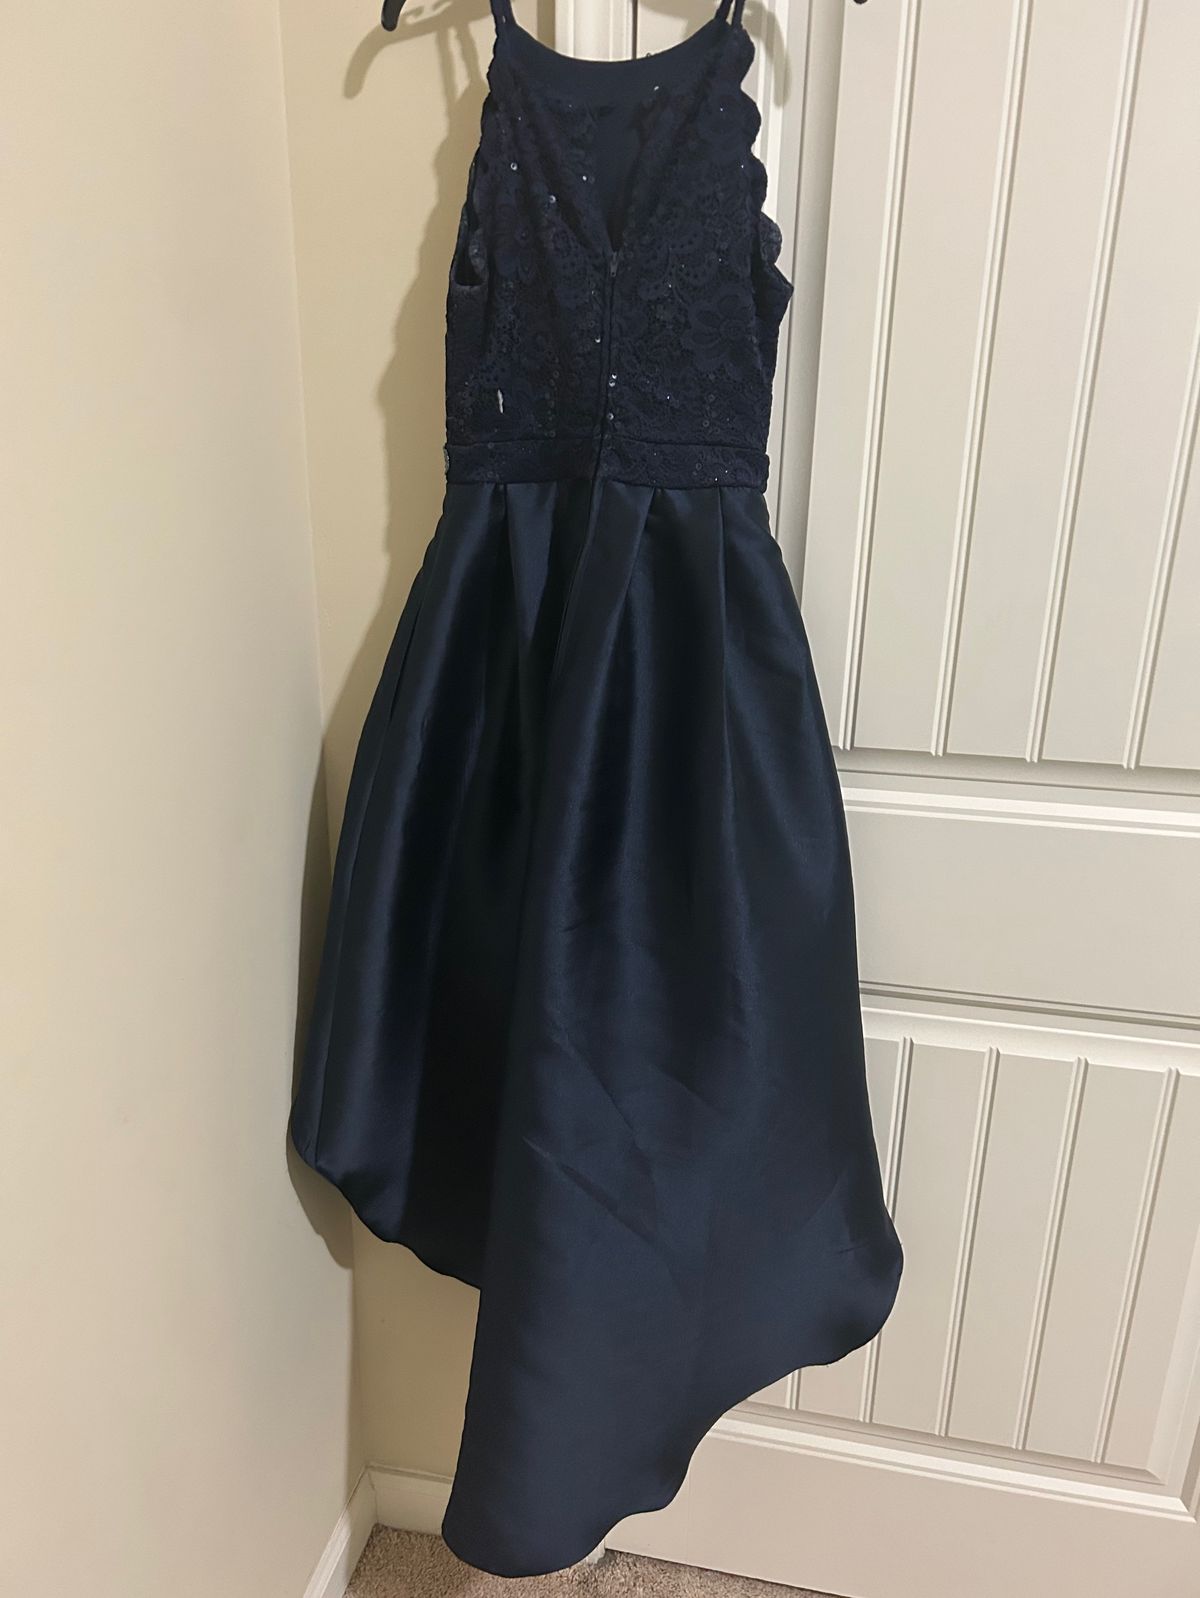 Girls Size 3 Prom High Neck Lace Navy Blue A-line Dress on Queenly